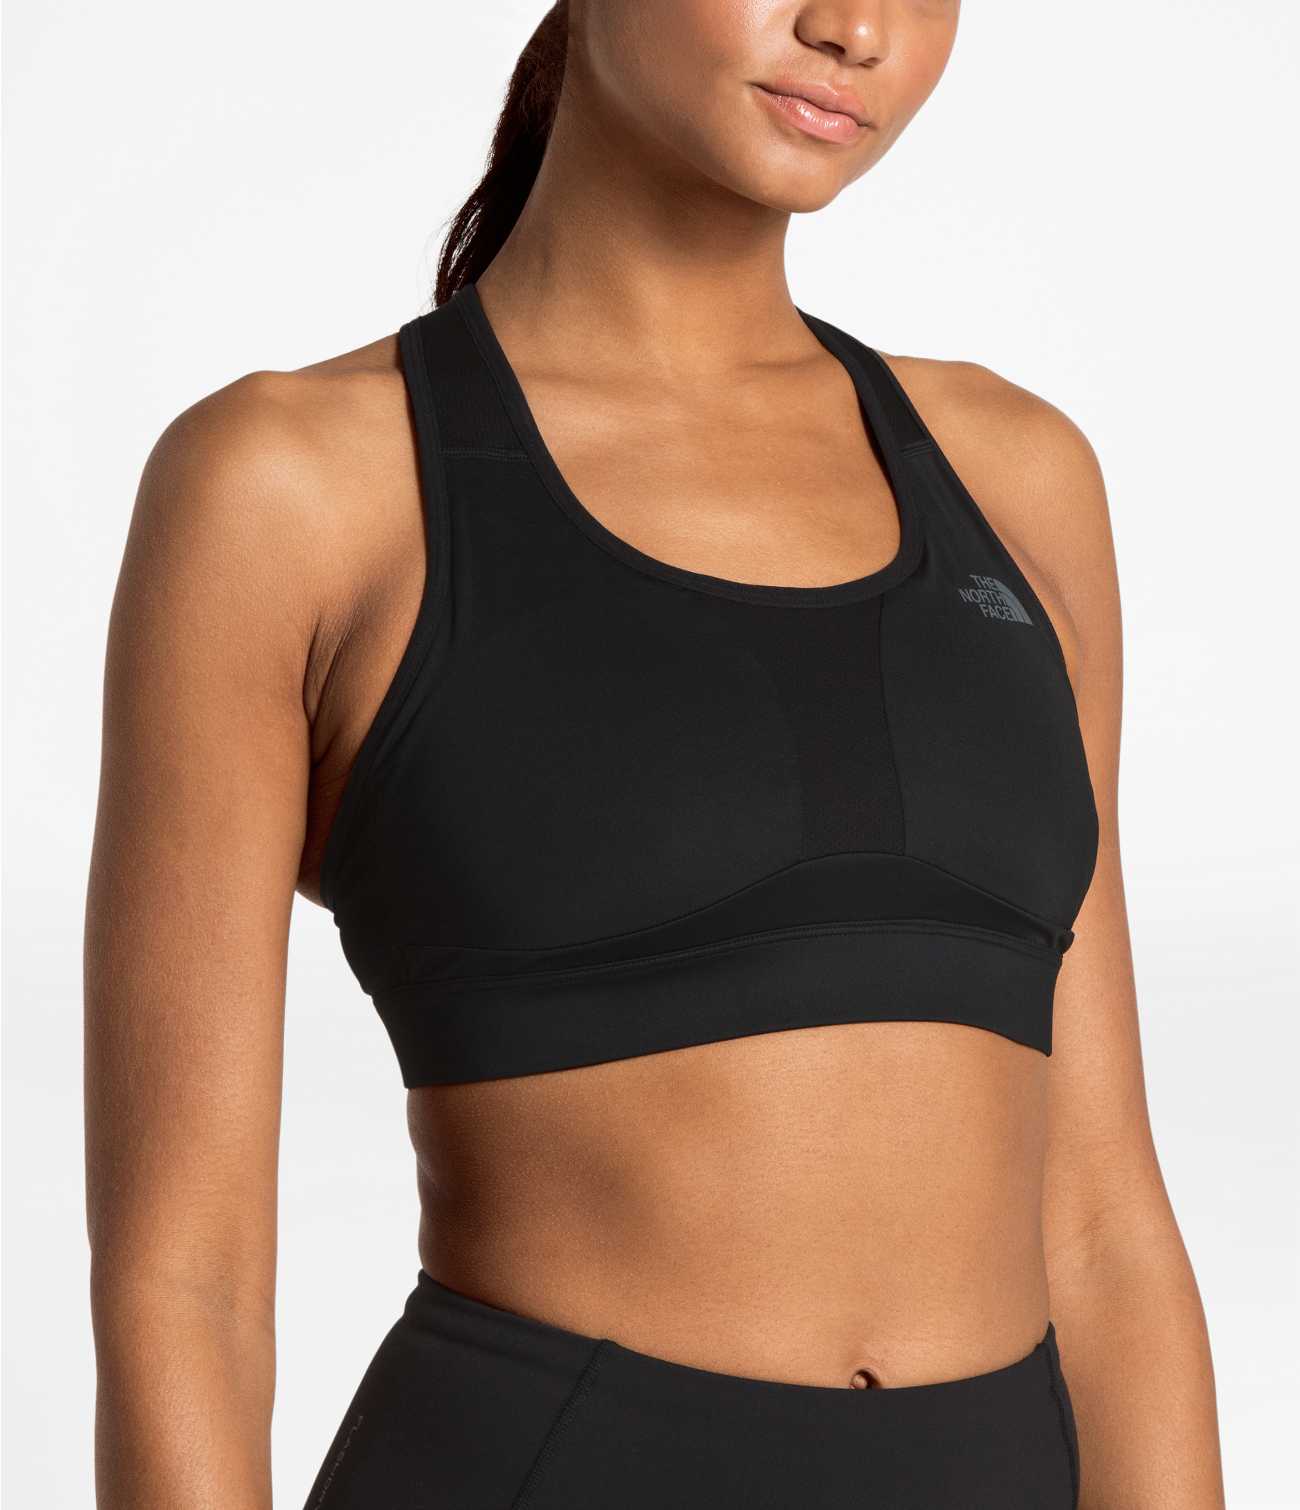 The North Face Renewed - WOMEN'S STOW-N-GO BRA C/D